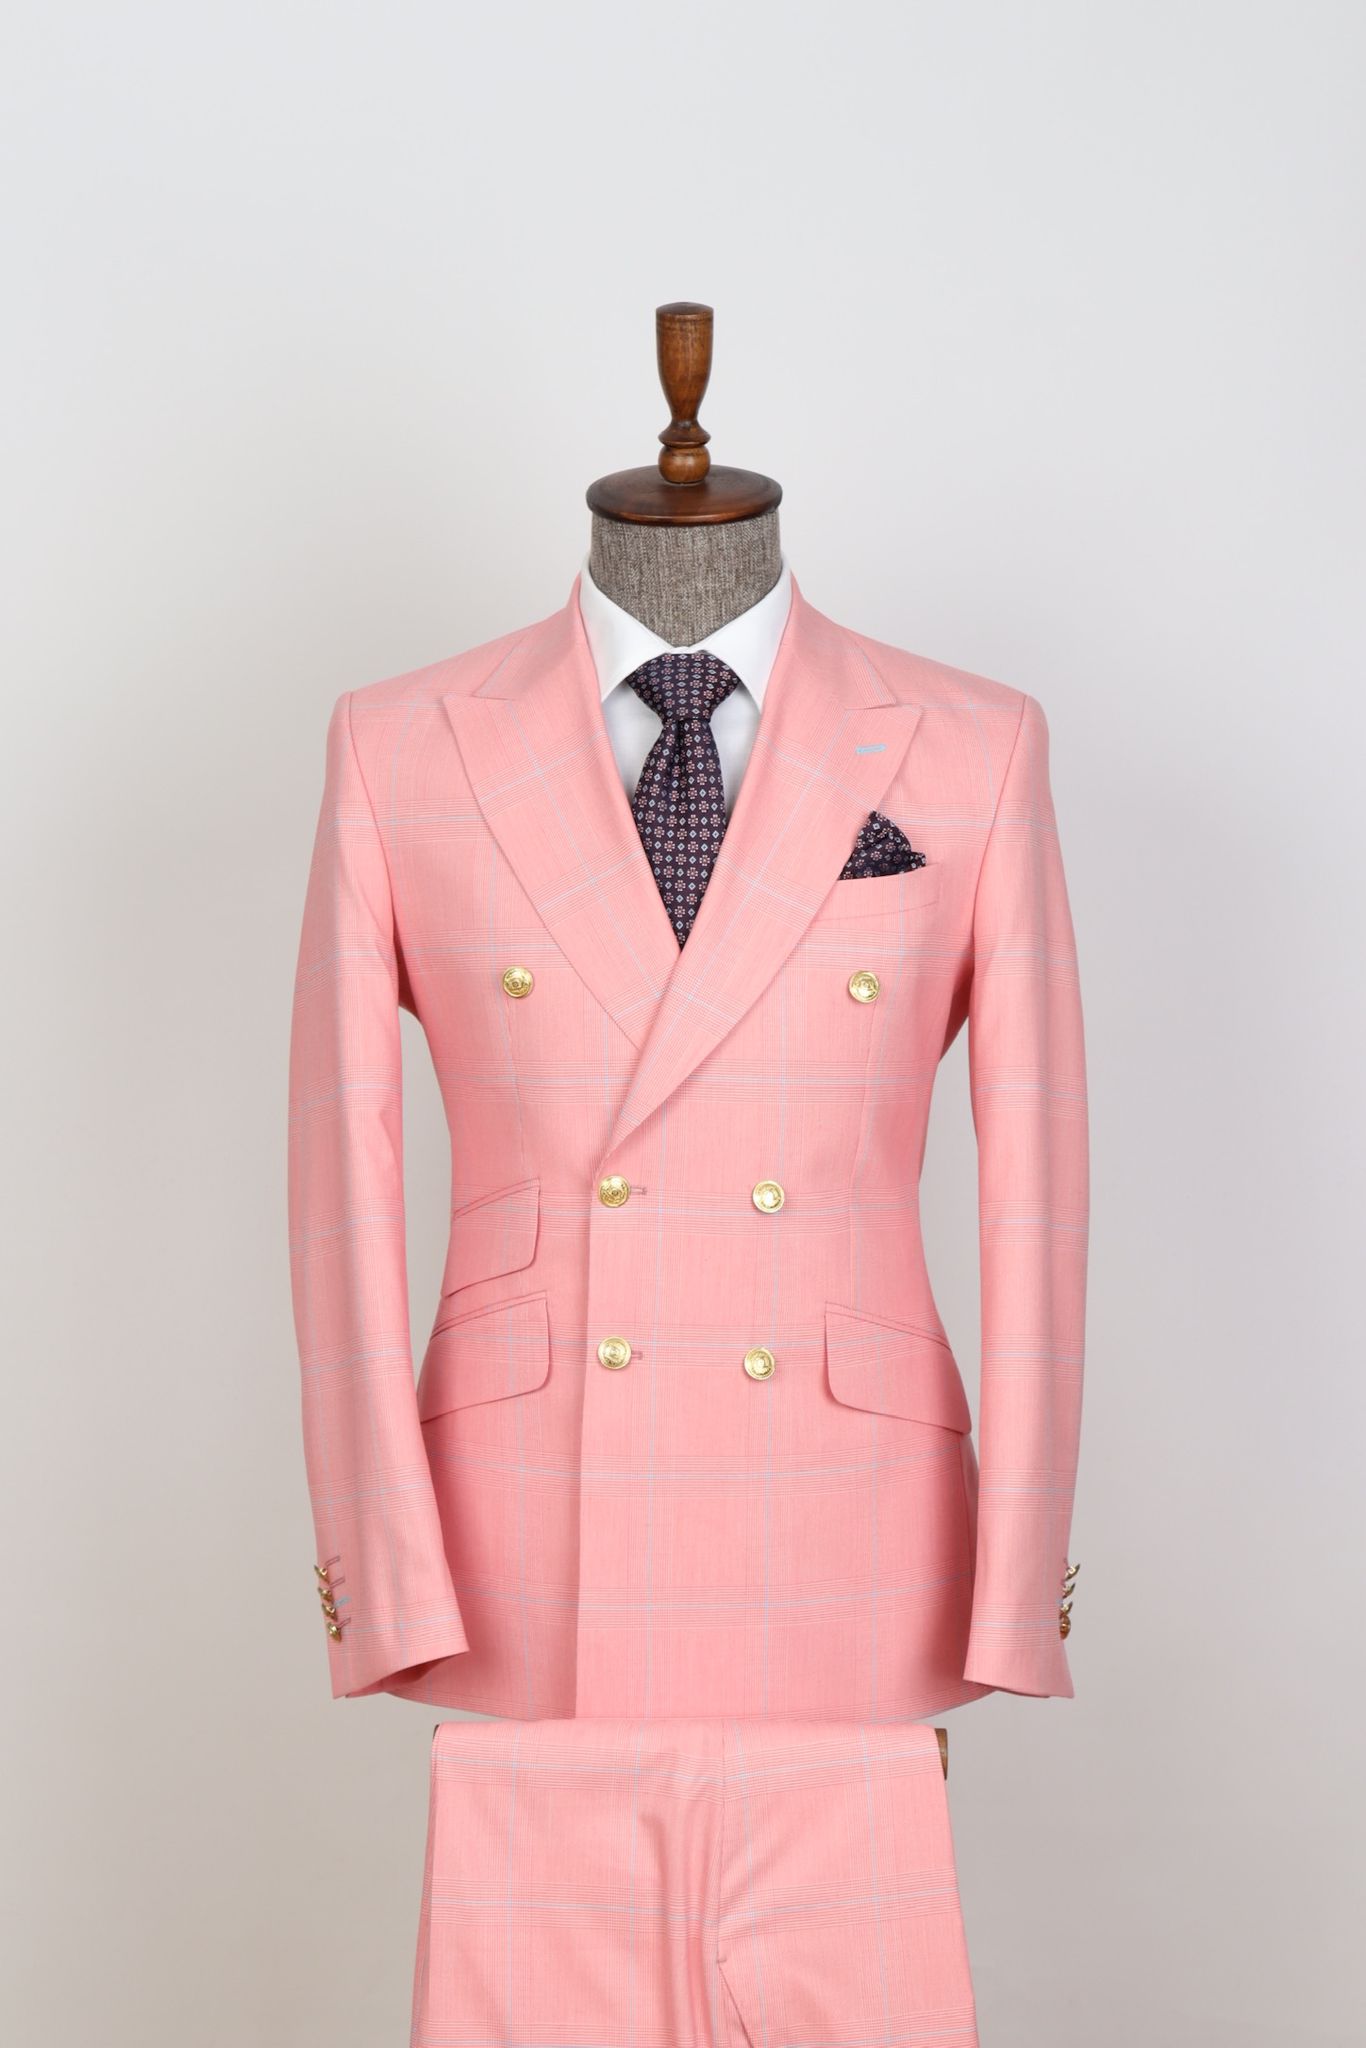 PINK DOUBLE BREASTED PLAIDED SUIT